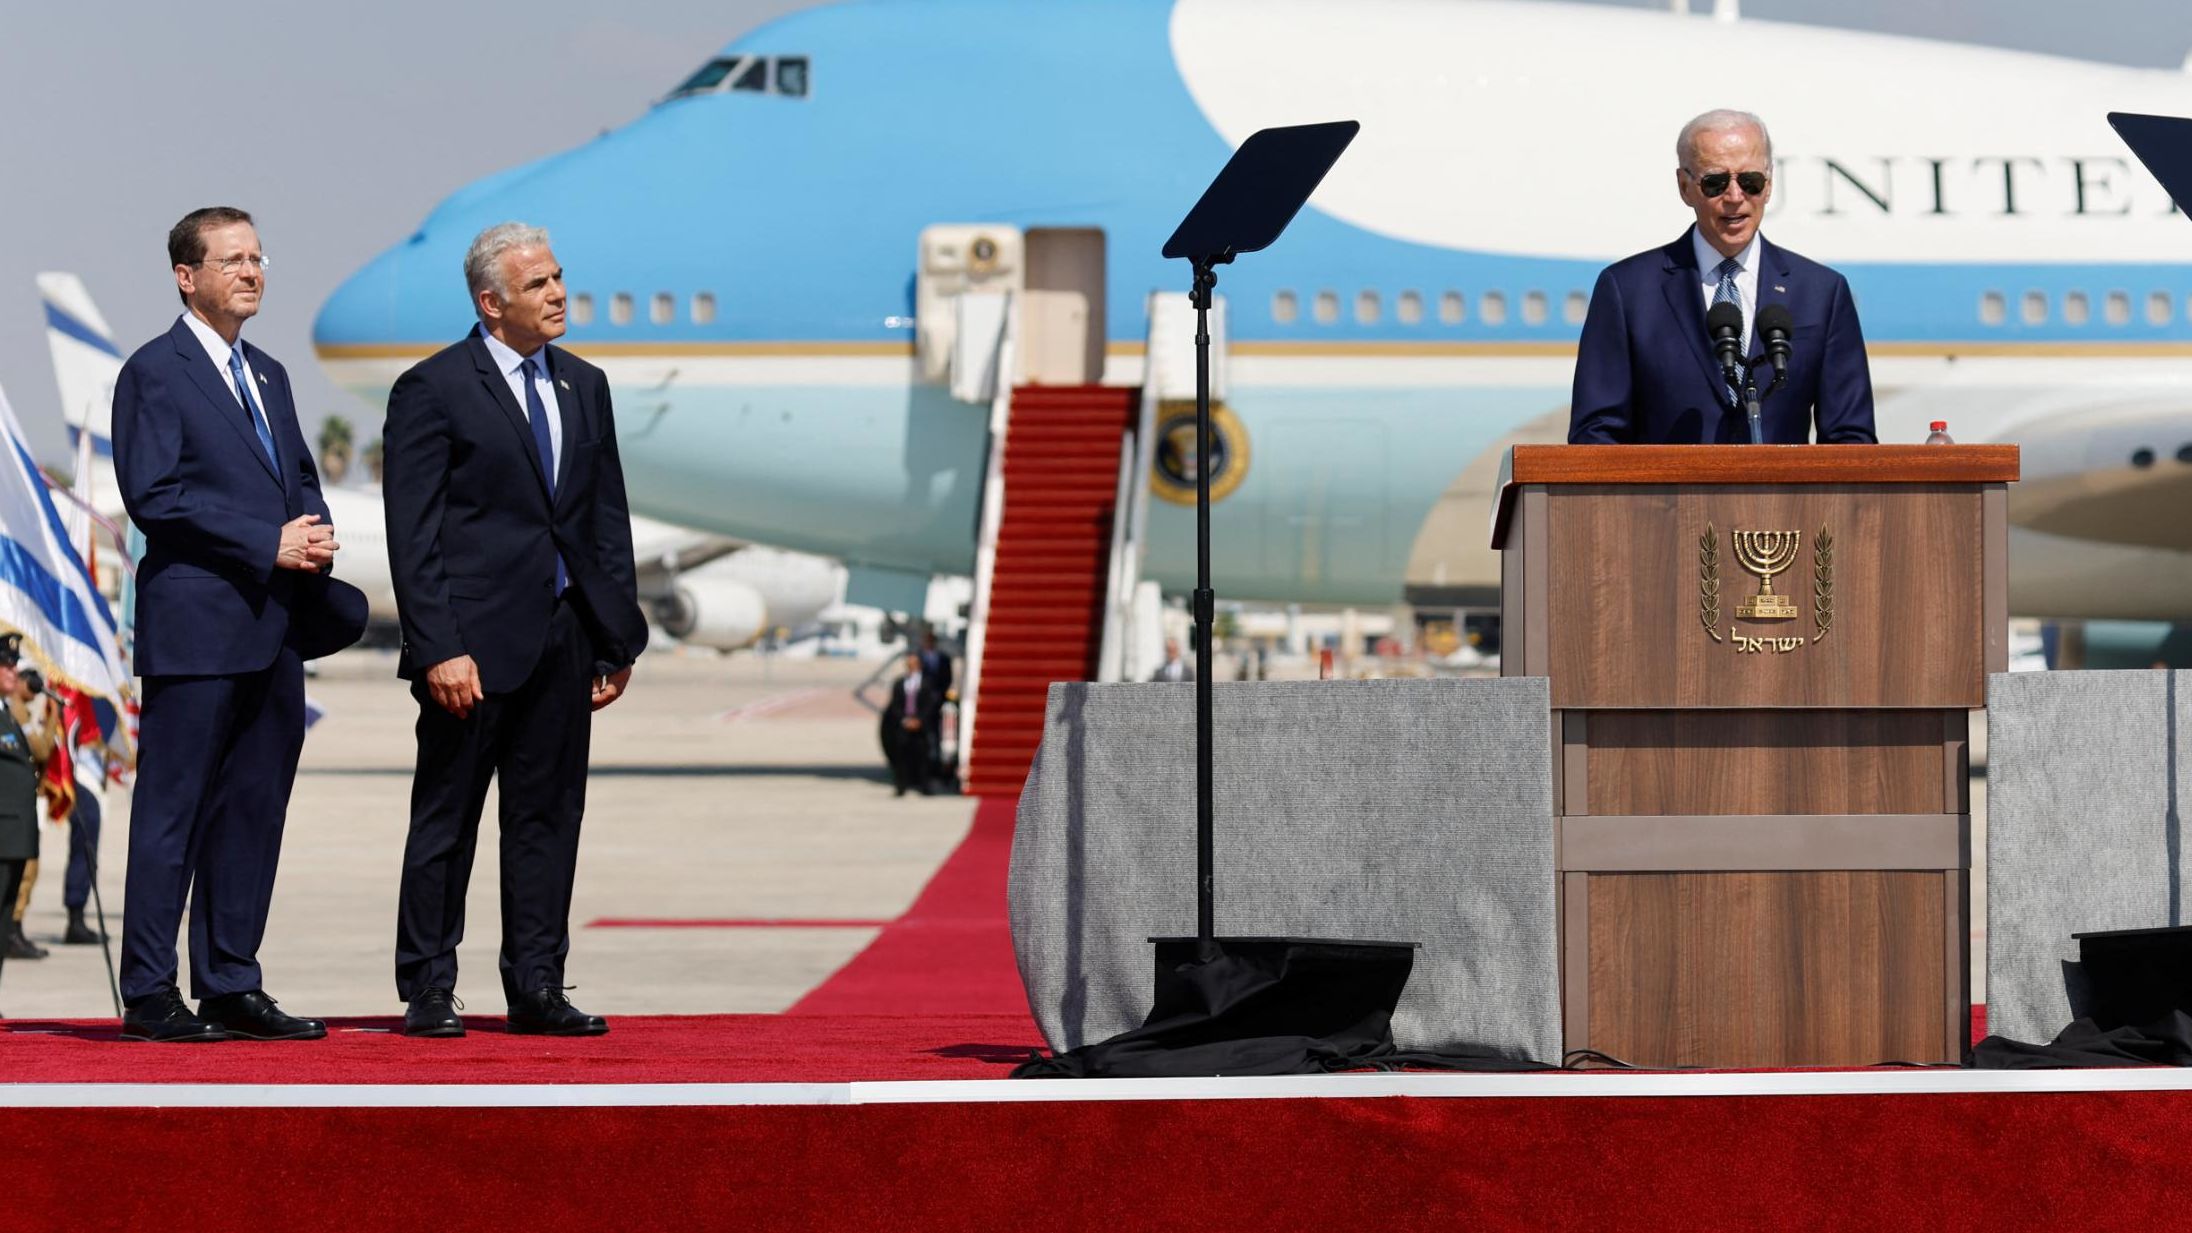 "We're going to deepen our connections in science and innovation and work to address global challenges through the new strategic high-level dialogue on technology," Biden said in his remarks at the Ben Gurion Airport. "We'll continue to advance Israel's integration into the region, expand emerging forums and engagement." The President added, "Greater peace, greater stability, greater connection. It's critical. It's critical, if I might add, for all the people of the region."